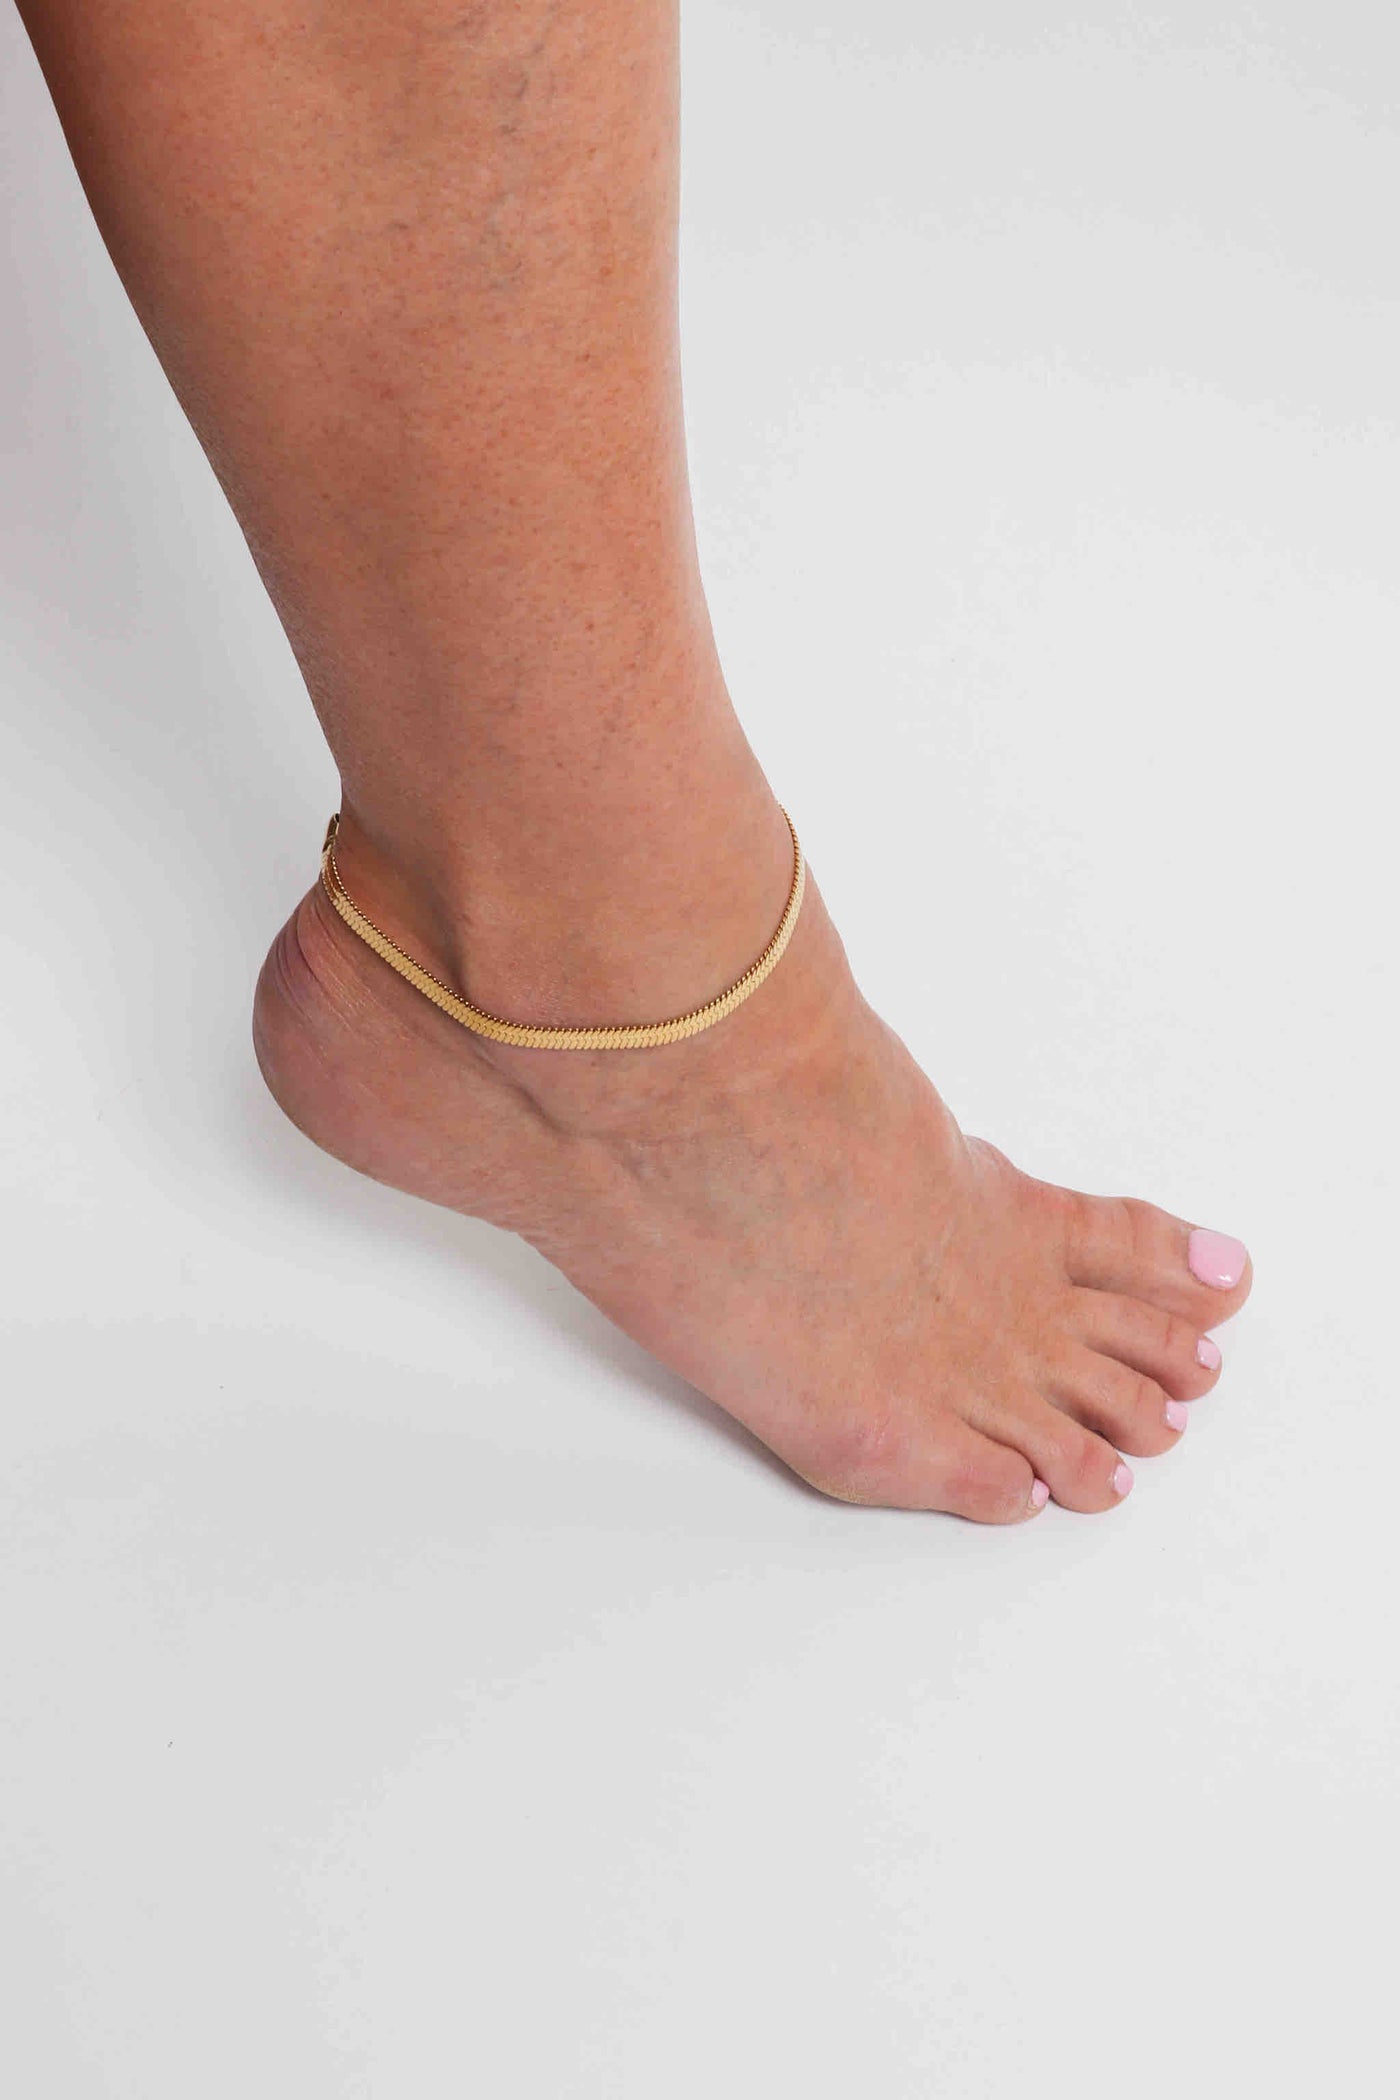 Marrin Costello wearing Marrin Costello Jewelry 5mm thick herringbone snake chain anklet with lobster clasp closure. Waterproof, sustainable, hypoallergenic. 14k gold plated stainless steel.